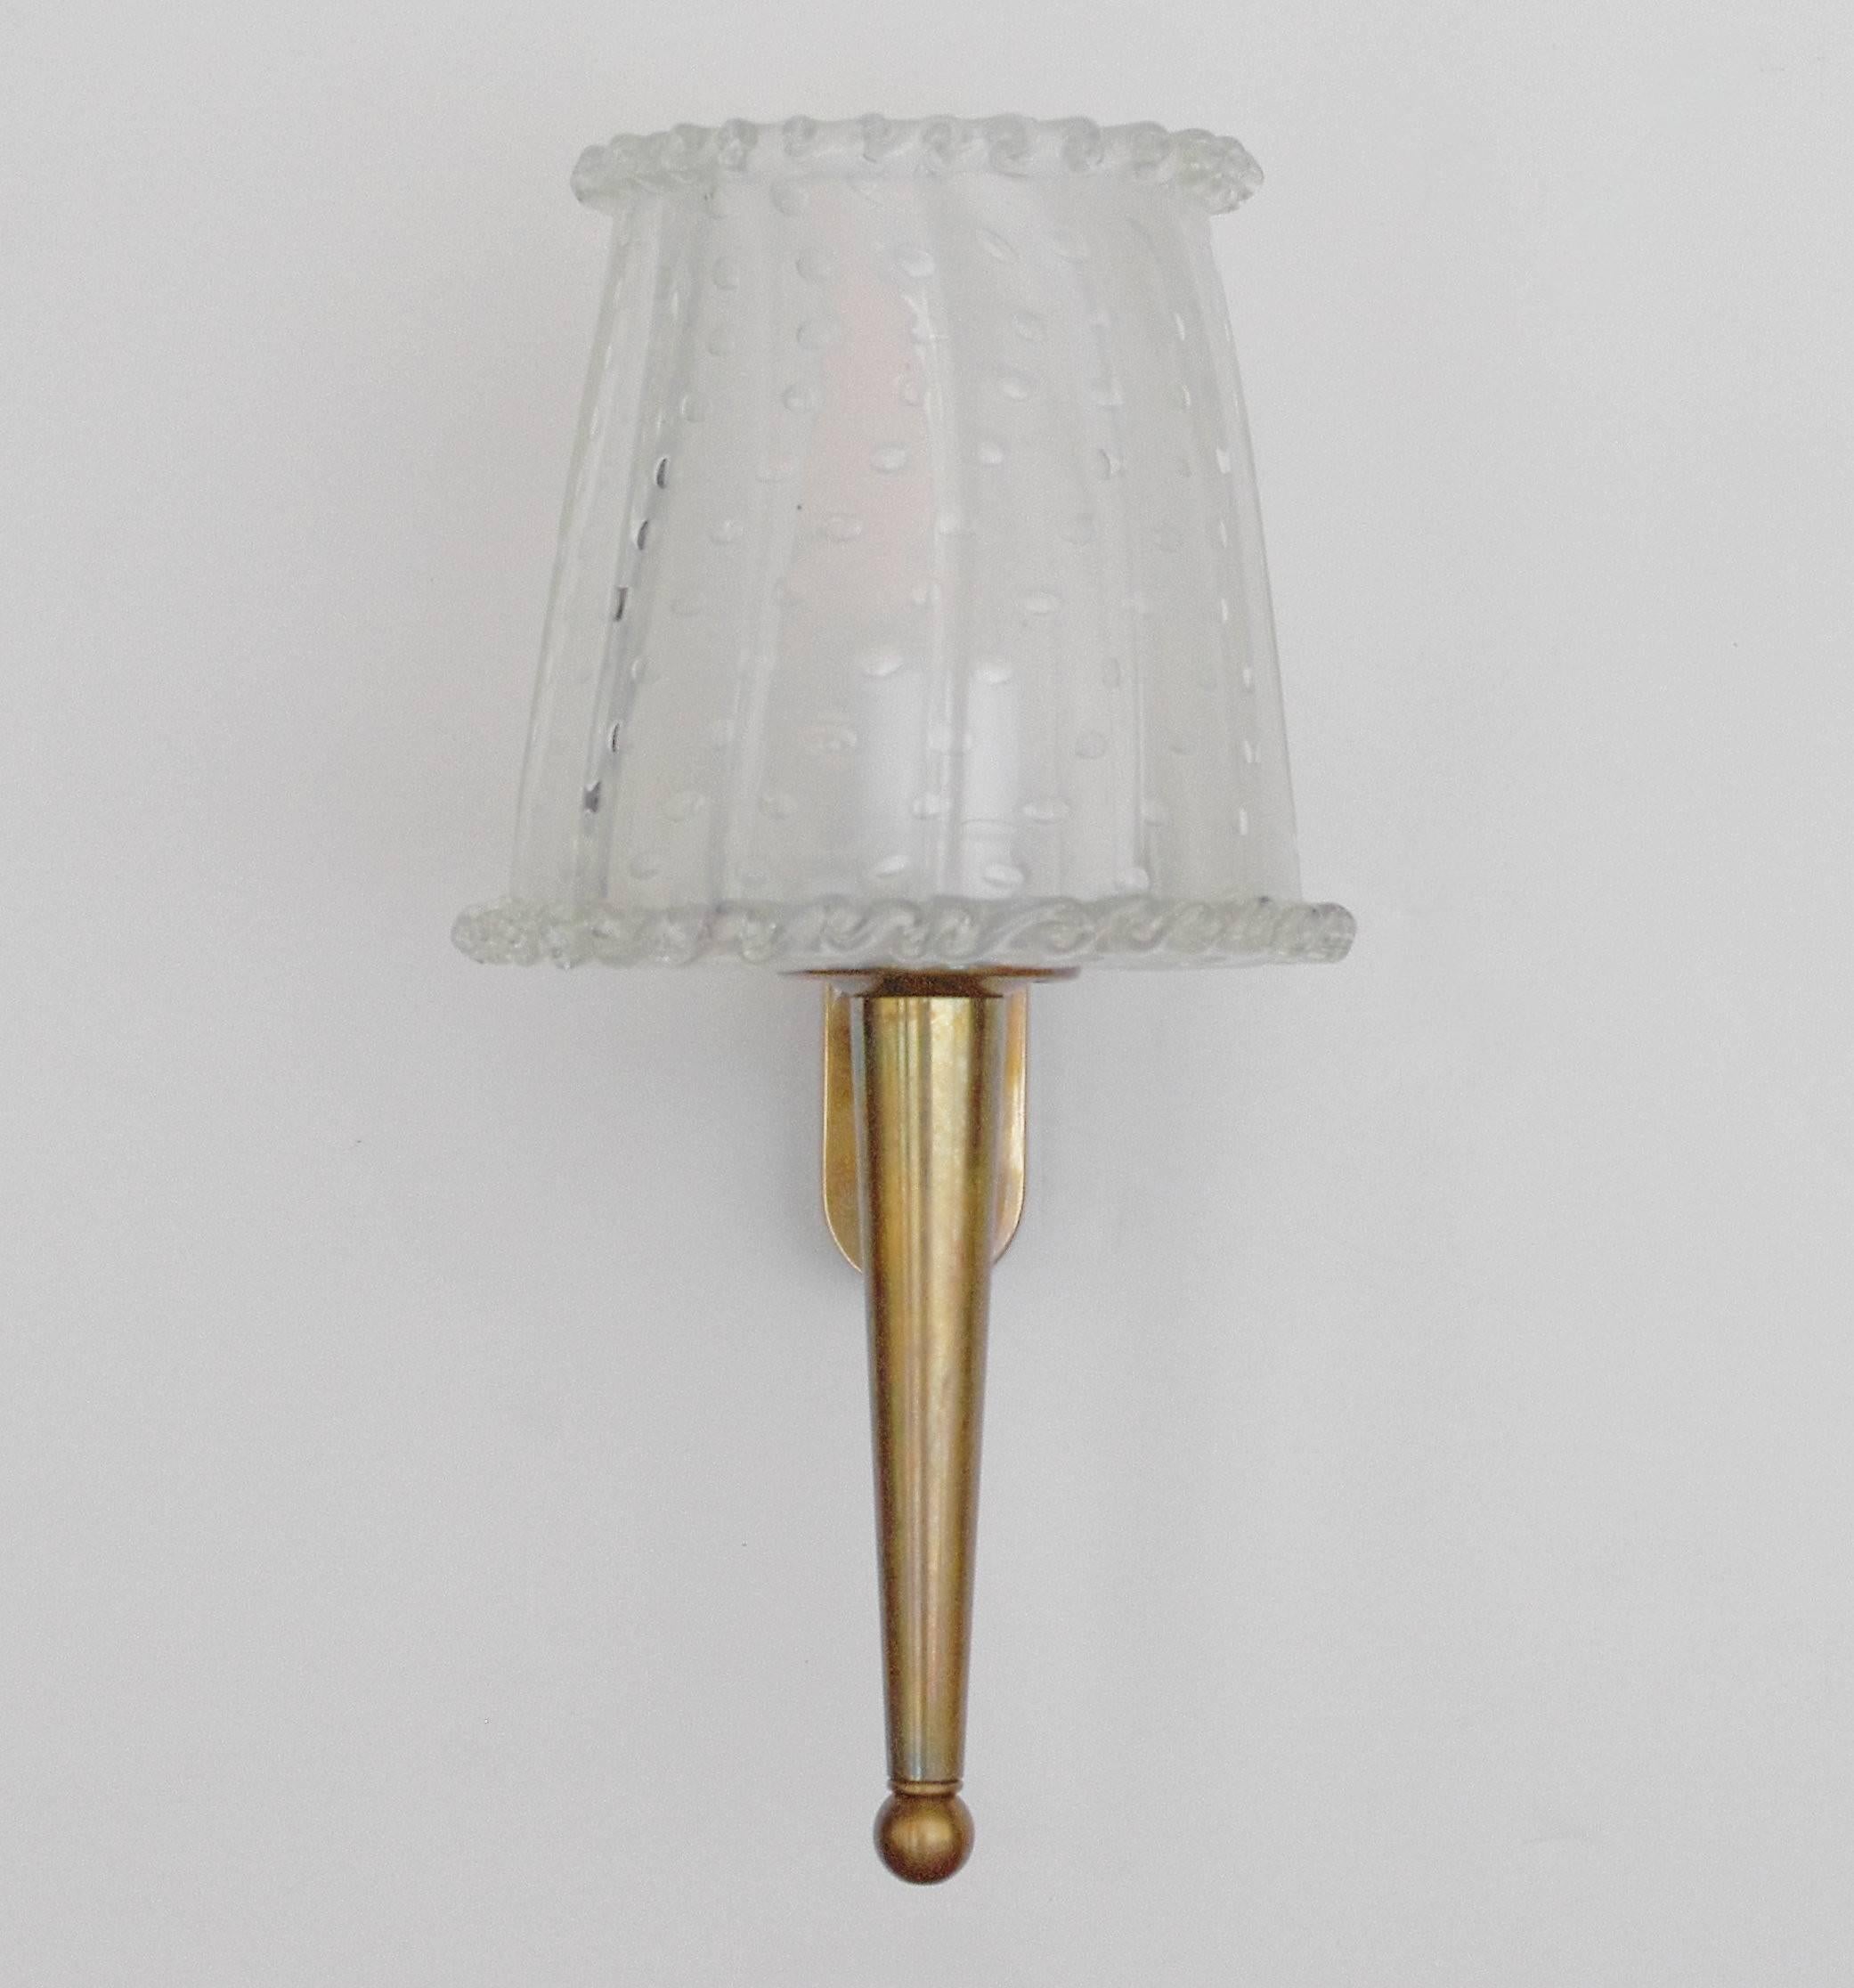 Vintage Italian wall light with lightly frosted clear Murano glass hand blown to produce a lamp shade with bubbles within the glass in Pulegoso technique mounted on a brass bracket / Made in Italy in the 1960’s
1 light / E12 or E14 type / max 40W